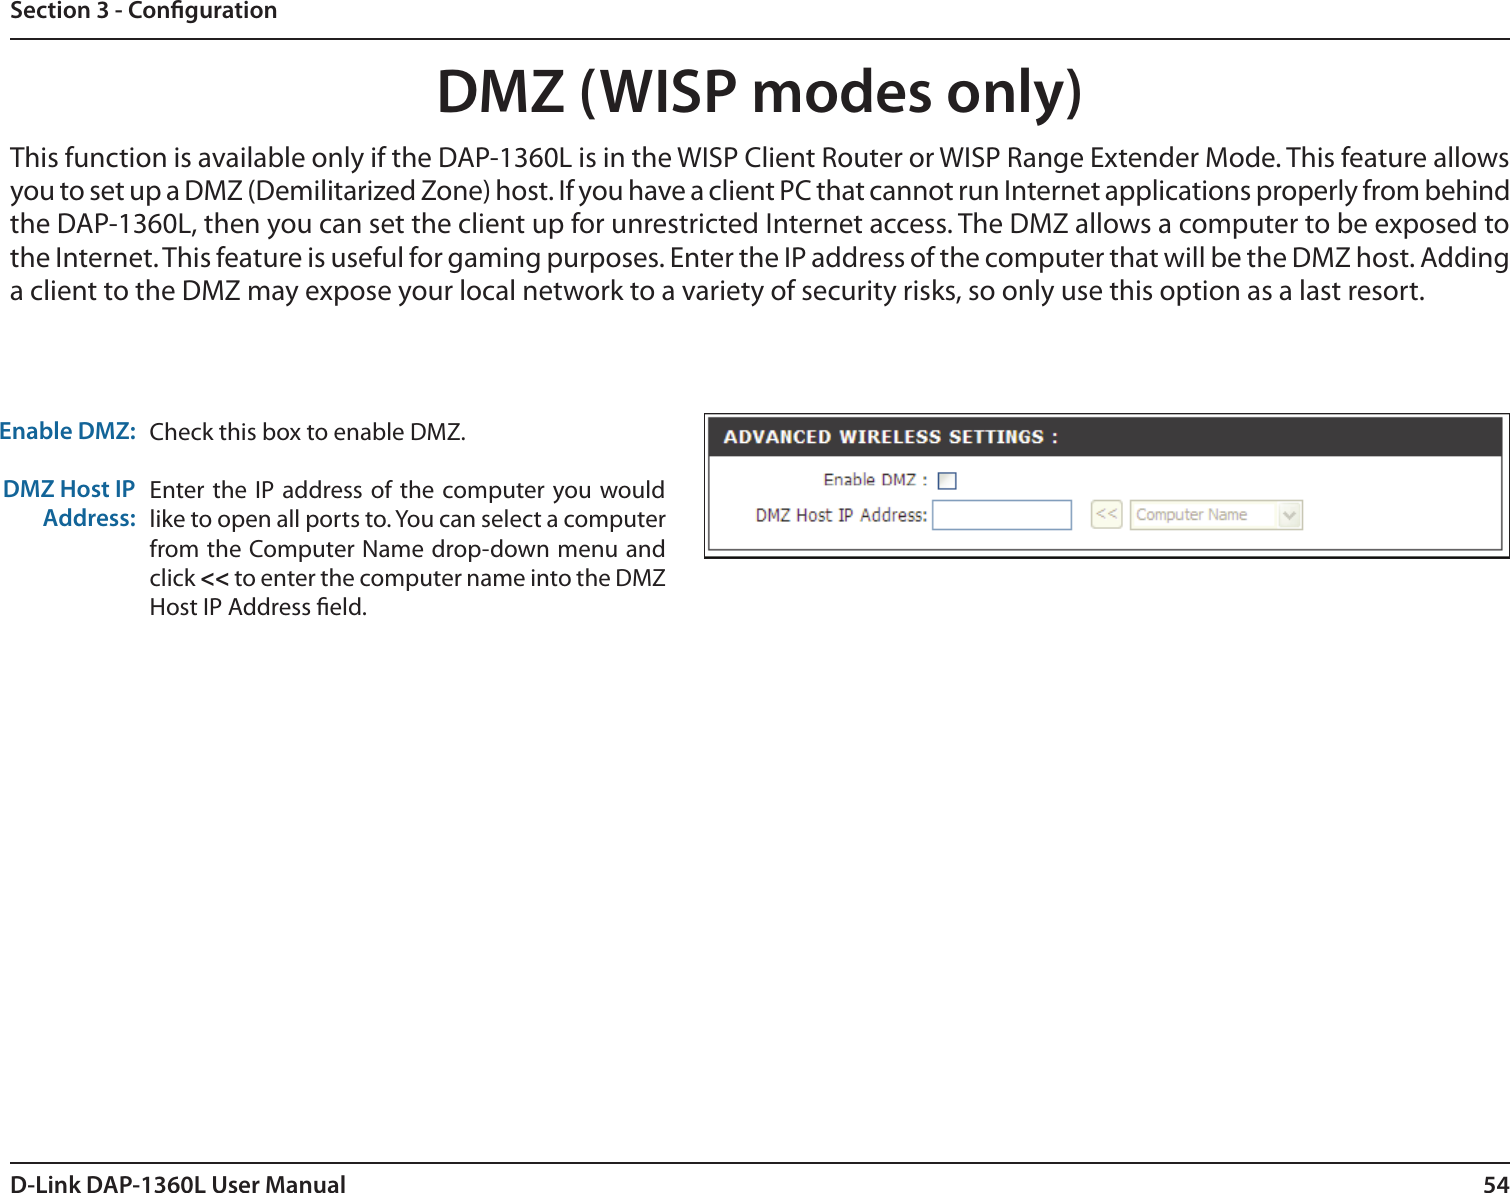 54D-Link DAP-1360L User ManualSection 3 - CongurationDMZ (WISP modes only)Check this box to enable DMZ.Enter the  IP address of the computer you would like to open all ports to. You can select a computer from the Computer Name drop-down menu and click &lt;&lt; to enter the computer name into the DMZ Host IP Address eld.Enable DMZ:DMZ Host IP Address:This function is available only if the DAP-1360L is in the WISP Client Router or WISP Range Extender Mode. This feature allows you to set up a DMZ (Demilitarized Zone) host. If you have a client PC that cannot run Internet applications properly from behind the DAP-1360L, then you can set the client up for unrestricted Internet access. The DMZ allows a computer to be exposed to the Internet. This feature is useful for gaming purposes. Enter the IP address of the computer that will be the DMZ host. Adding a client to the DMZ may expose your local network to a variety of security risks, so only use this option as a last resort.